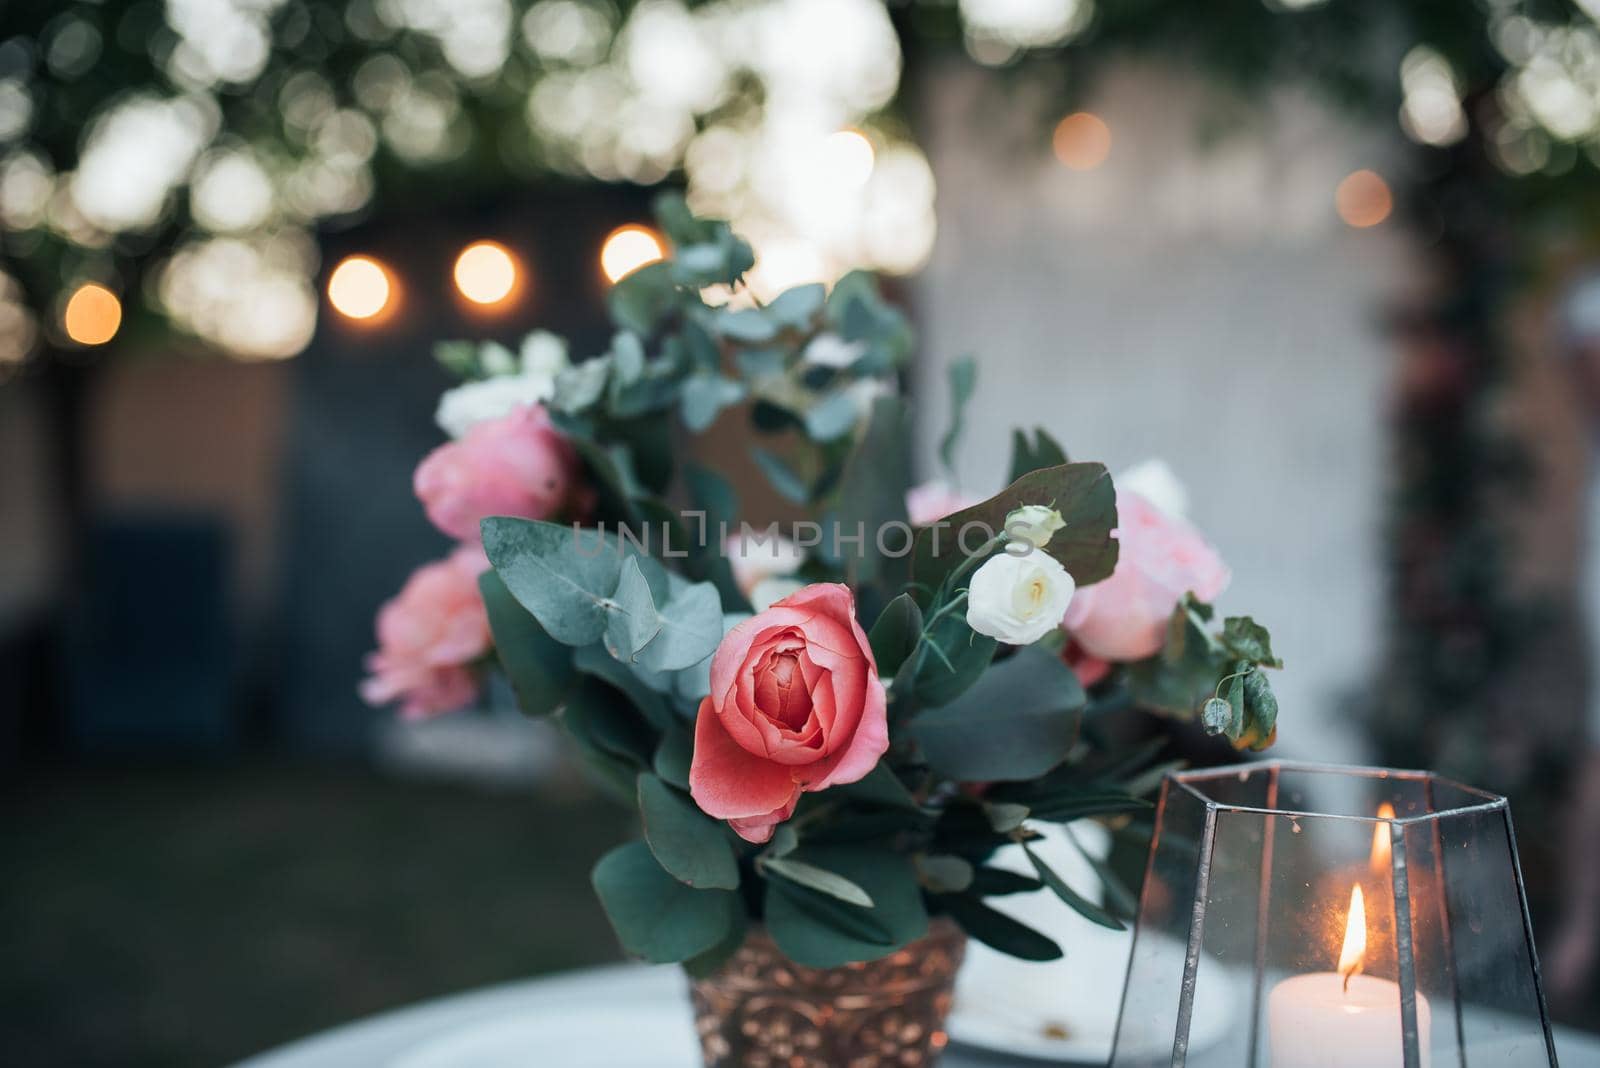 Beautiful flowers in rustic style at a wedding party.